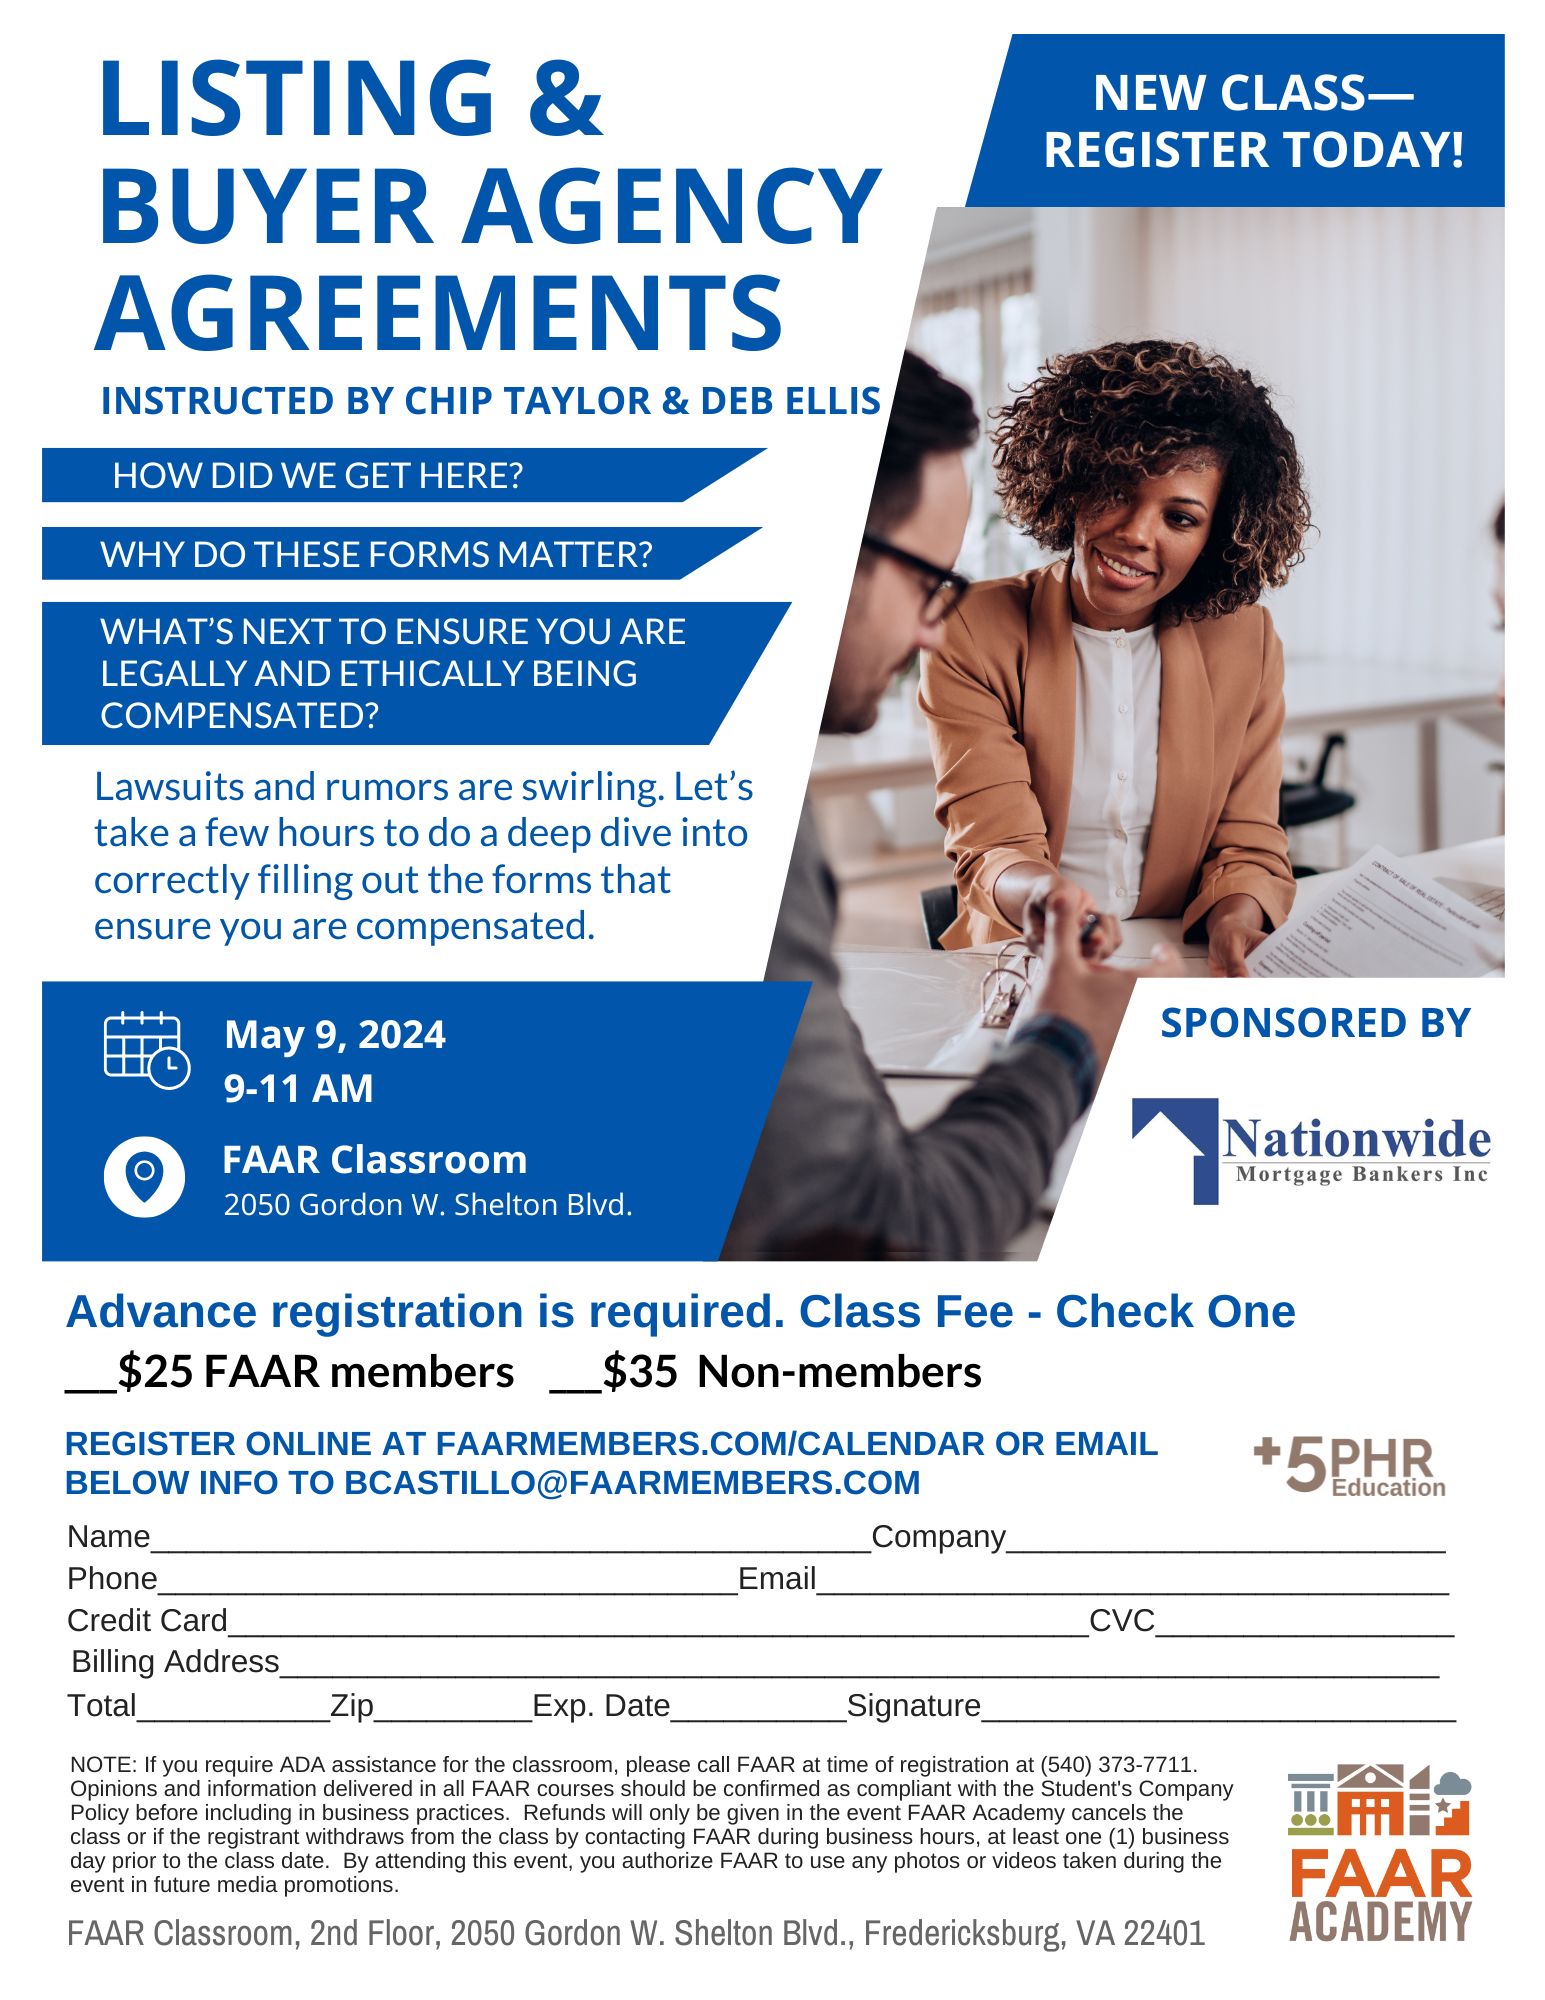 Listing & Buyer Agency Agreements real estate class flyer for May 9th, 2024 at FAAR from 9-11 AM. Call FAAR for registration or questions 540-373-7711.